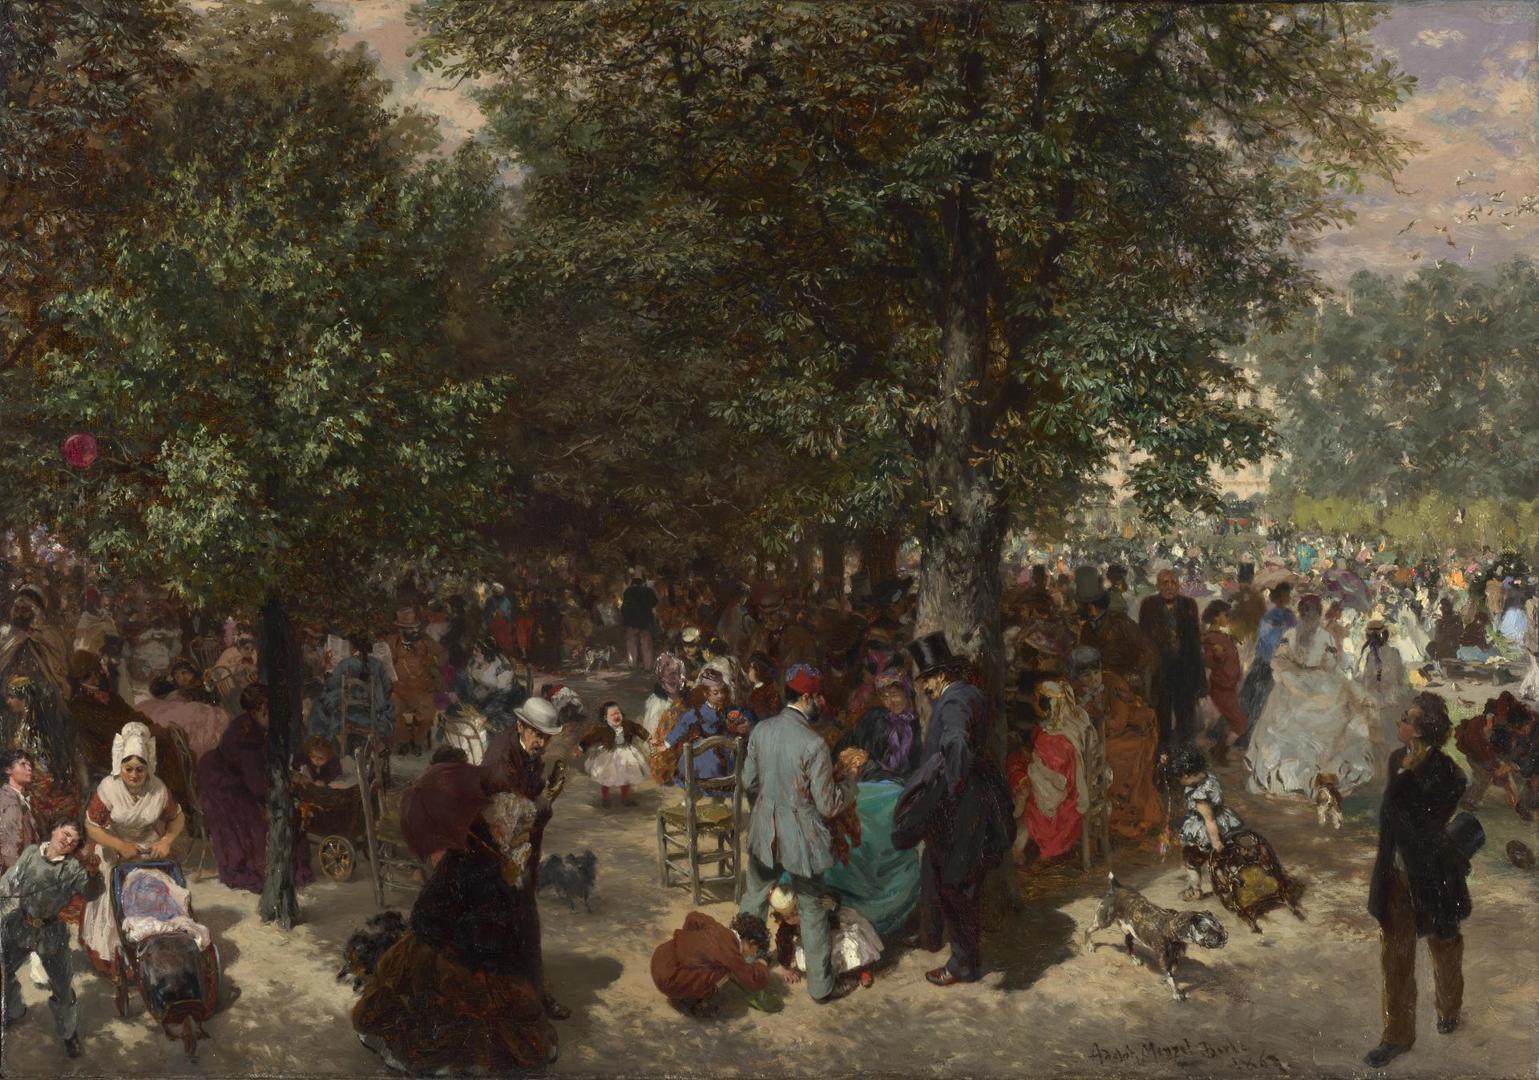 Afternoon in the Tuileries Gardens by Adolph Menzel